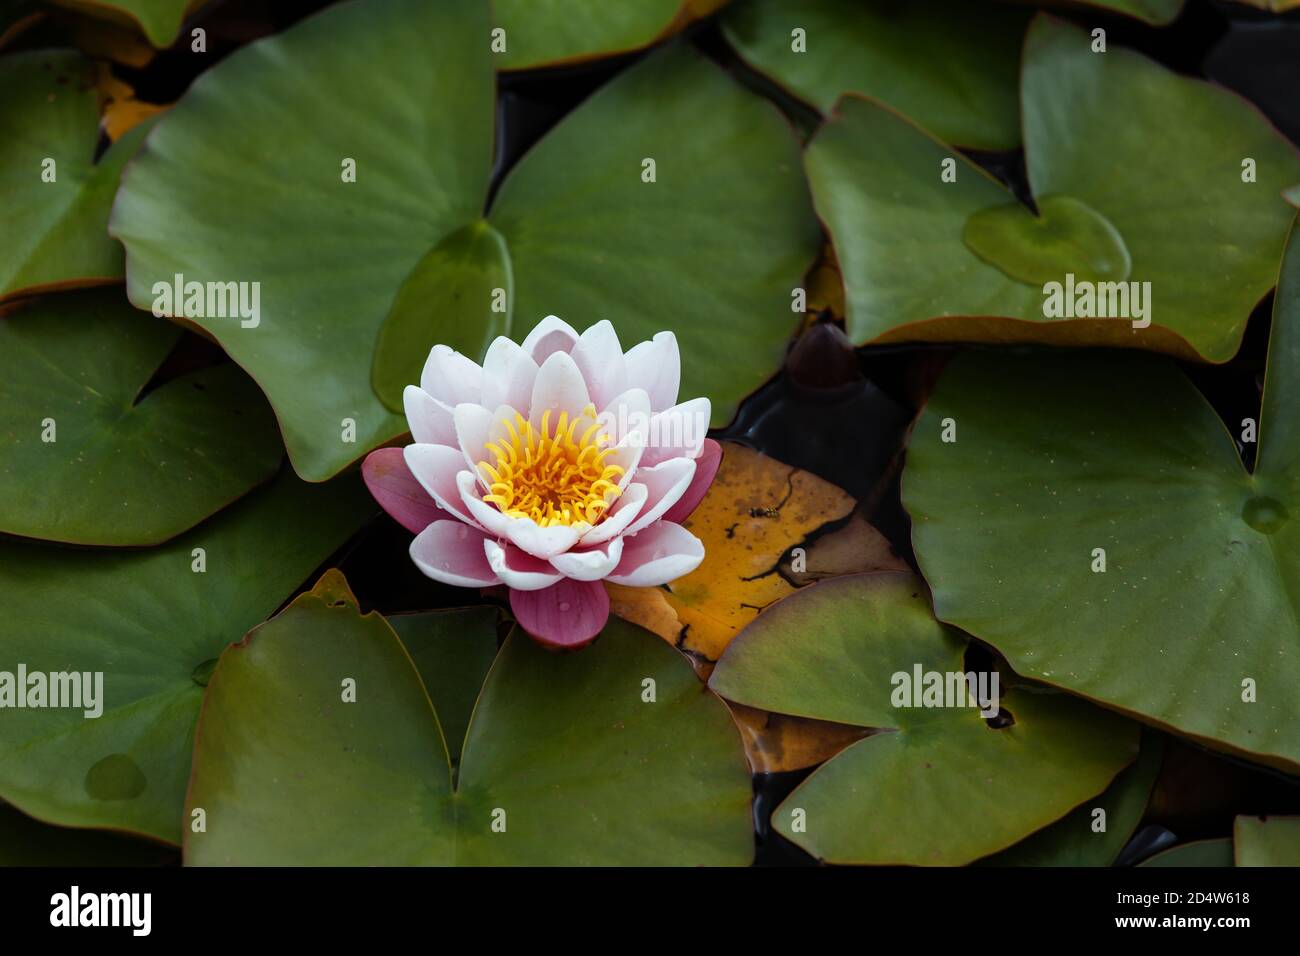 Beautiful water lily flower in the lake with a lot of green water lily leaves surrounded. Stock Photo